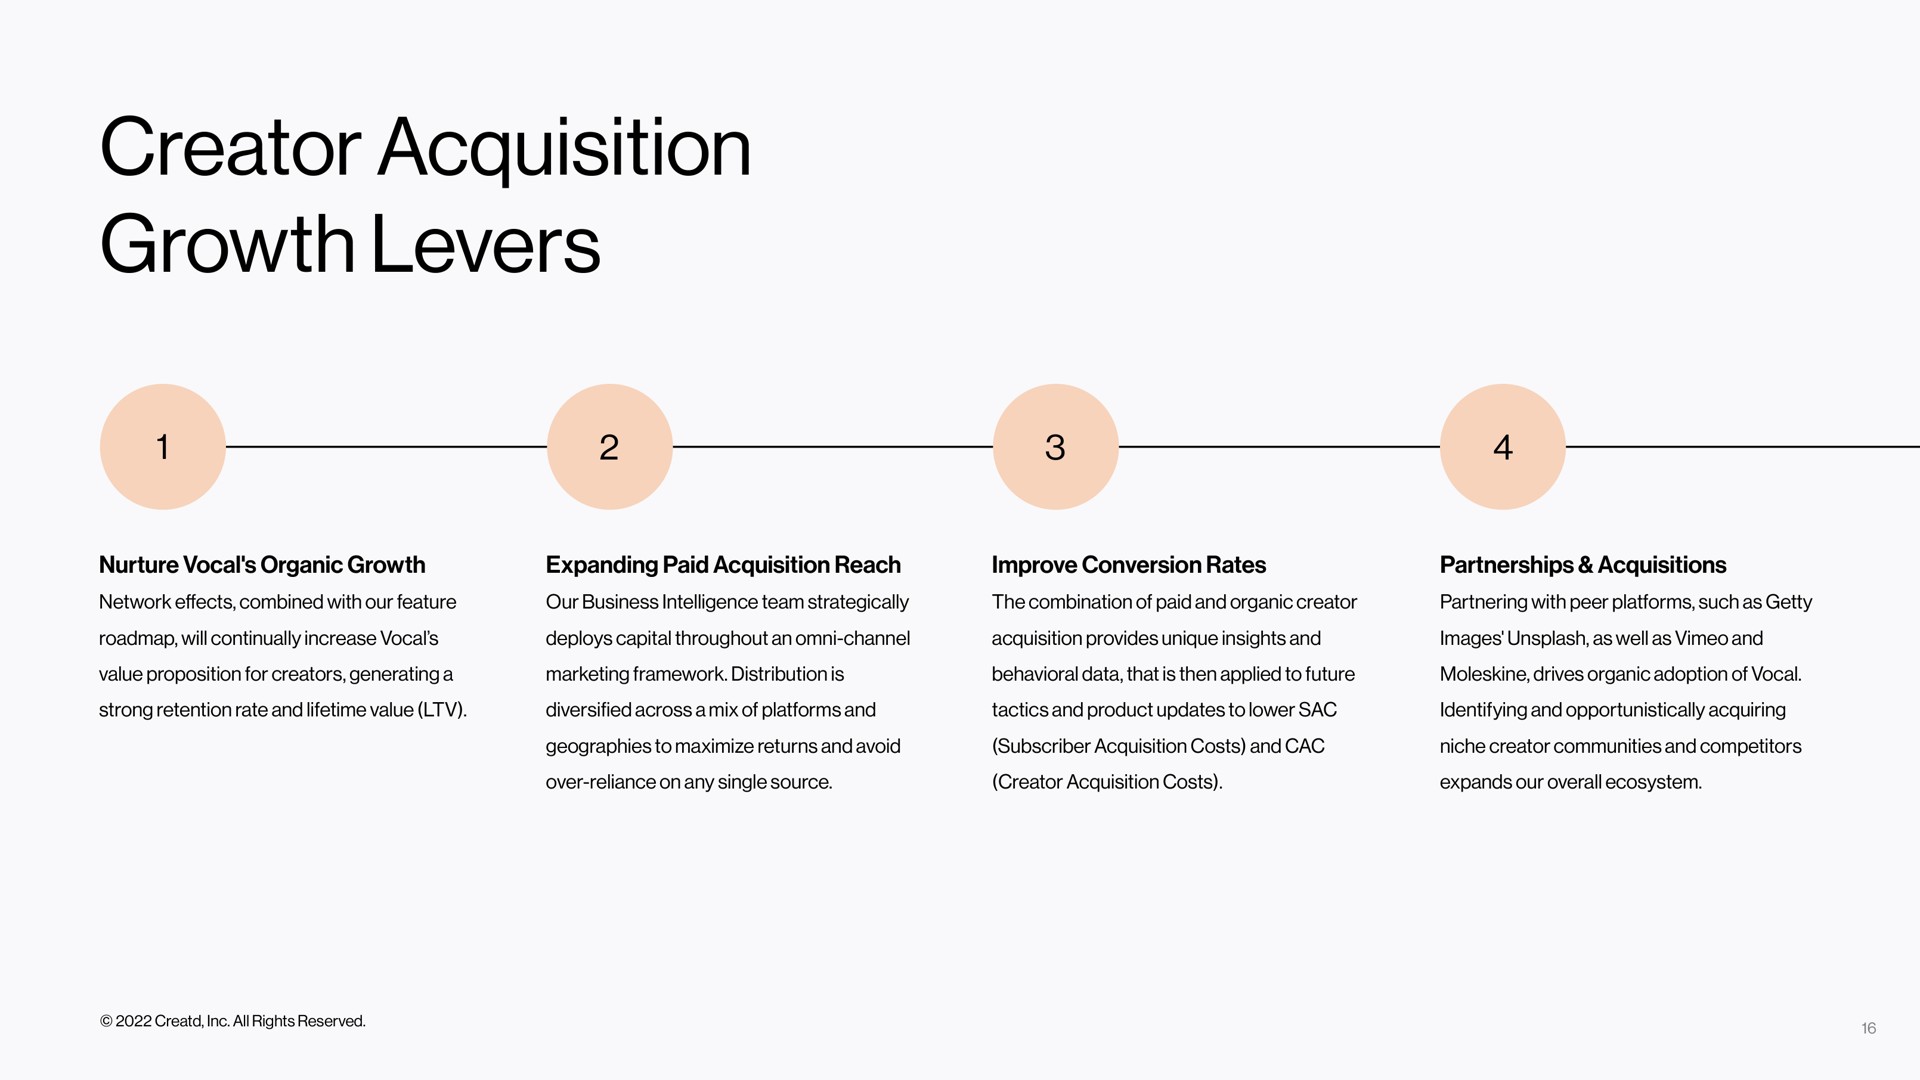 creator acquisition growth levers | Creatd